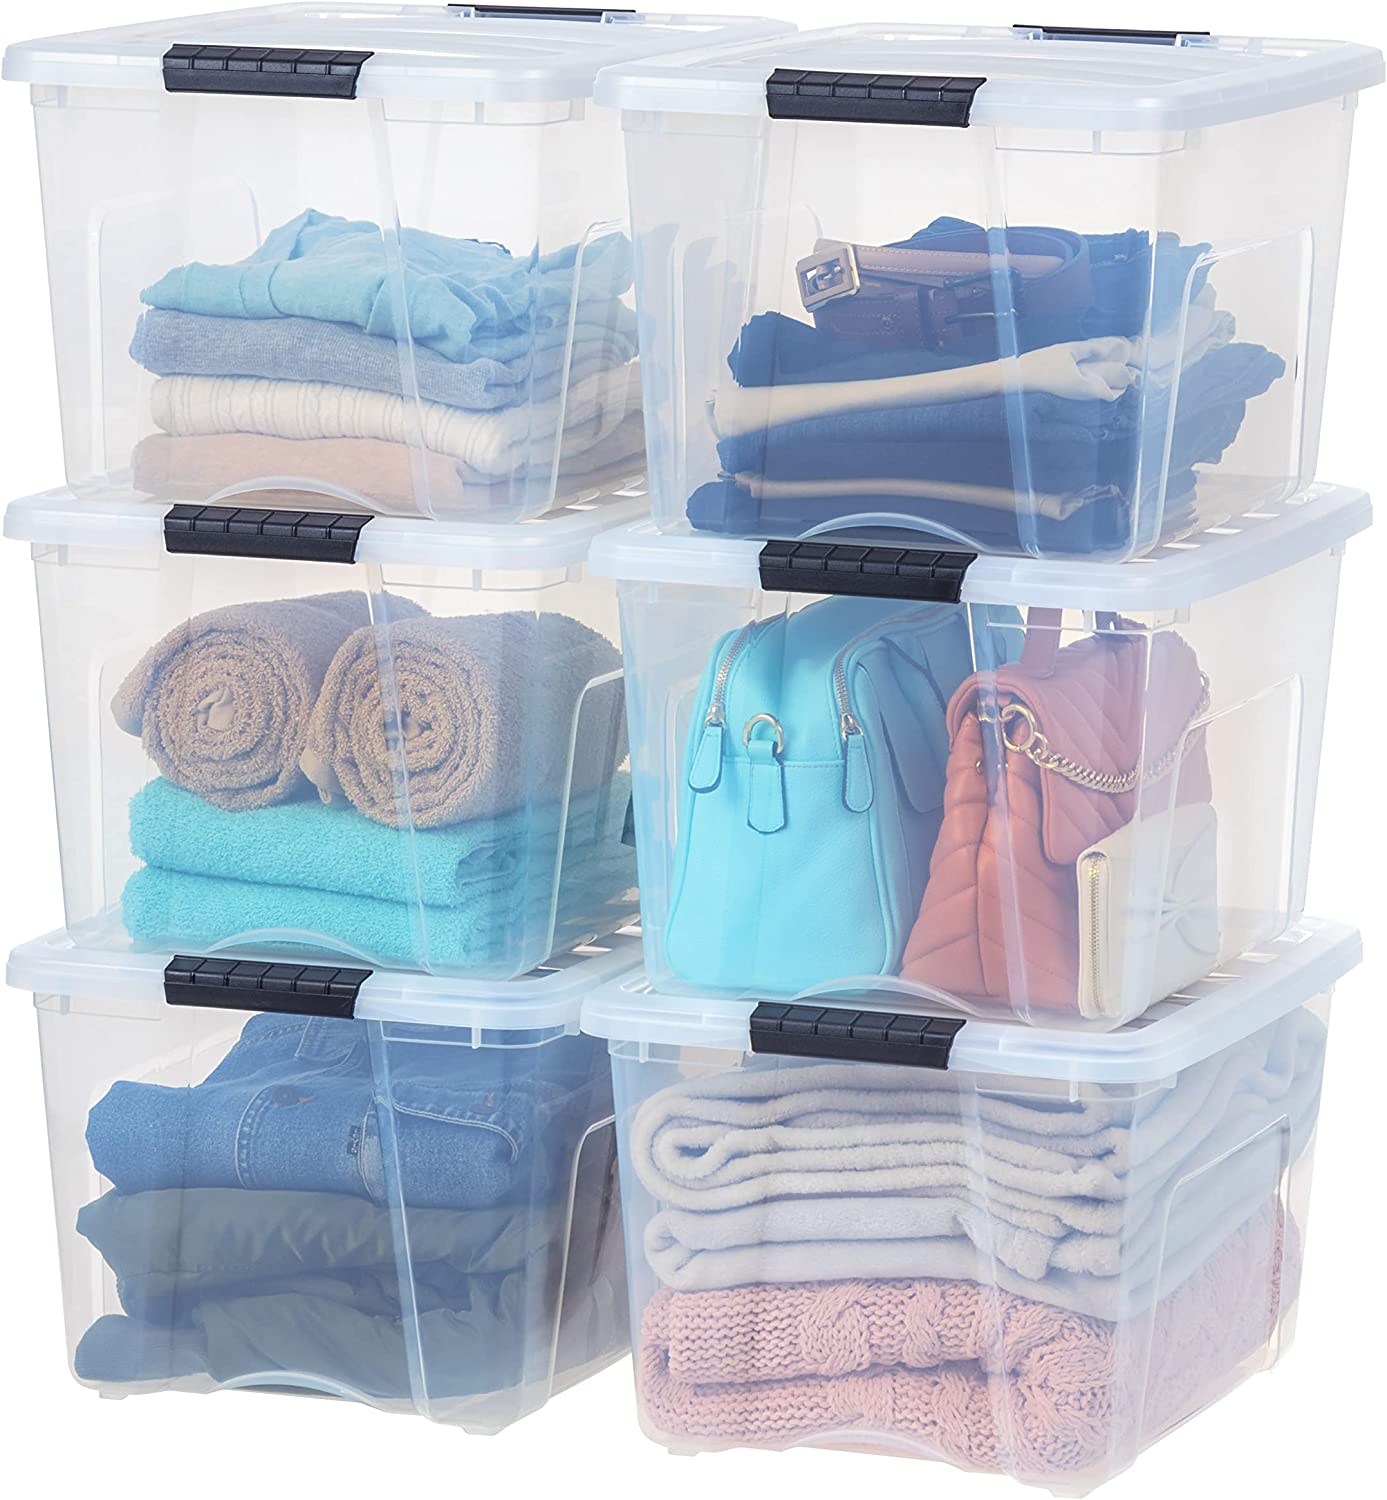 https://bigbigmart.com/wp-content/uploads/2023/06/IRIS-USA-40-Qt.-Plastic-Storage-Container-Bin-with-Secure-Lid-and-Latching-Buckles-6-pack-Clear-Durable-Stackable-Nestable-Organizing-Tote-Tub-Box-Toy-General-Organization-Medium.jpg